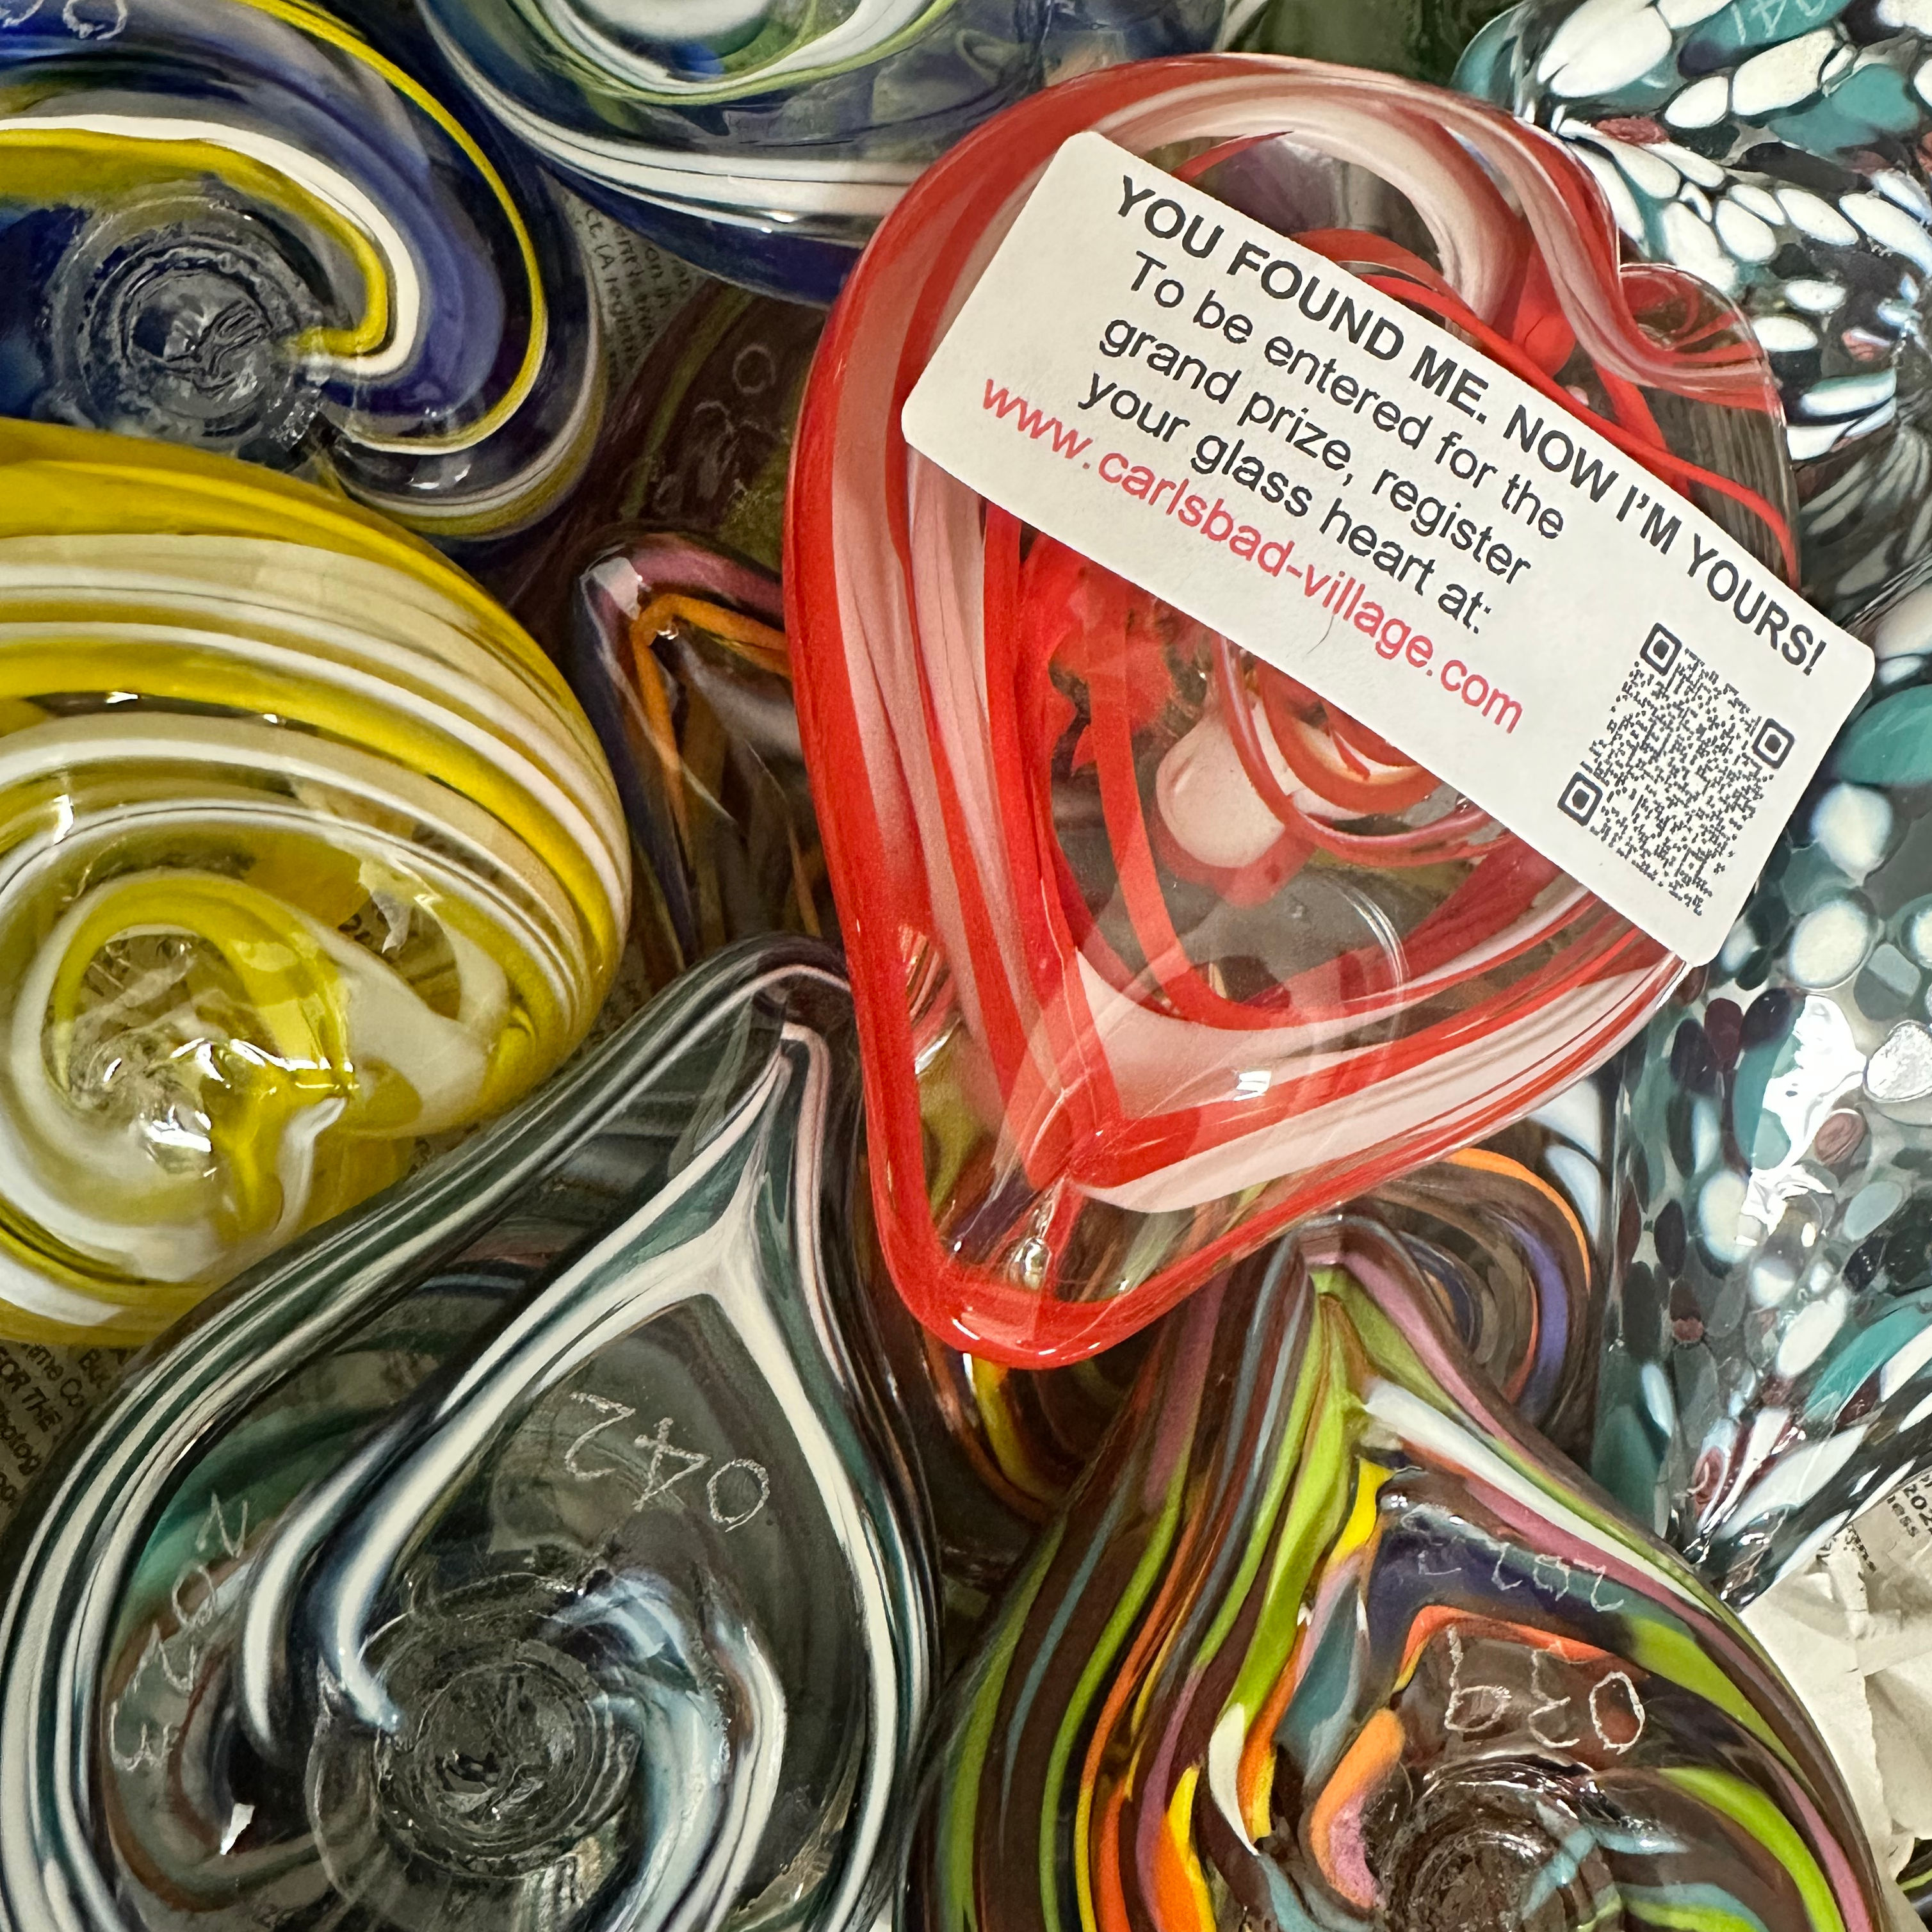 A Blown Glass Heart & A Chance For Prizes Too?